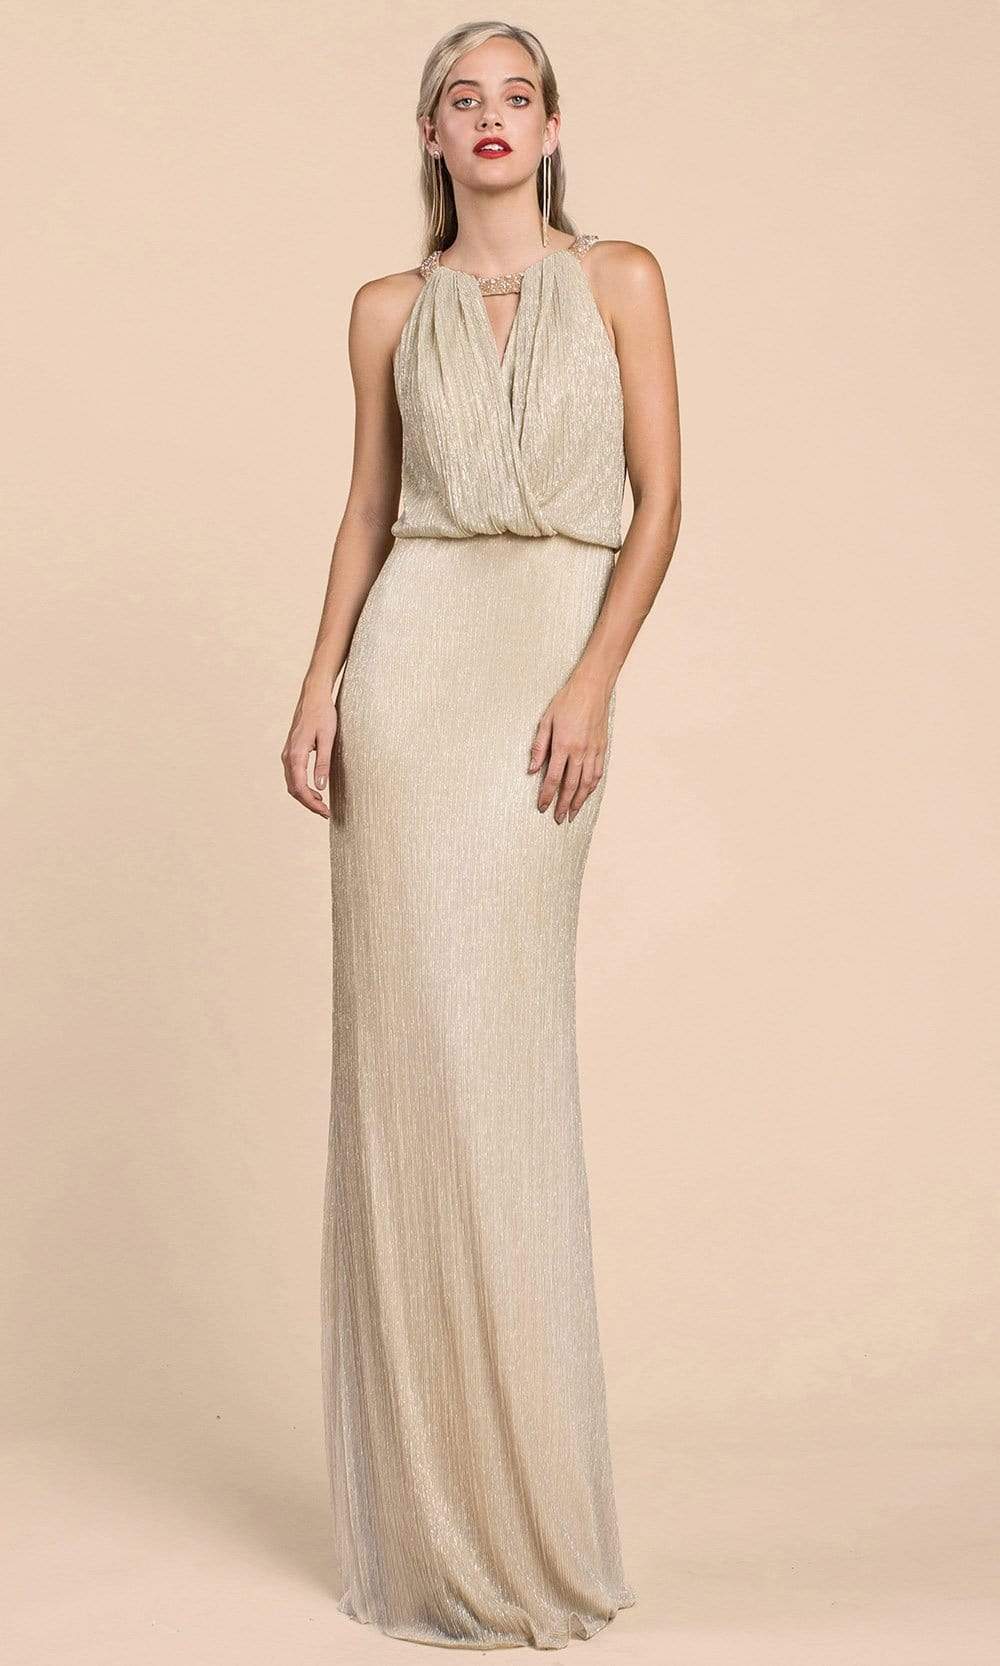 Andrea and Leo - A0500 Beaded Halter Neck Sheath Dress Special Occasion Dress